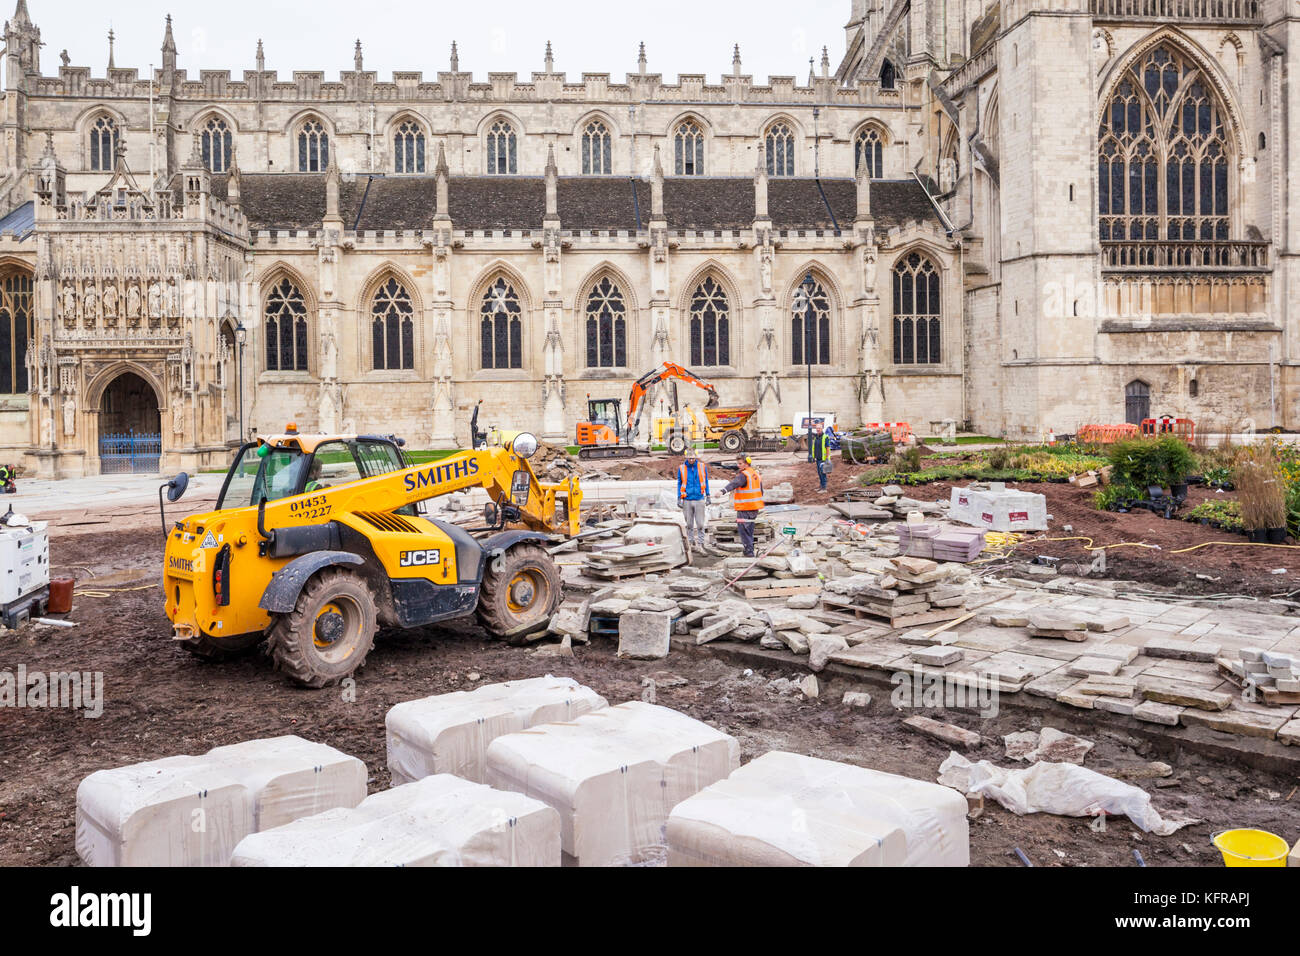 Major landscaping work in progress at Gloucester Cathedral UK Stock Photo